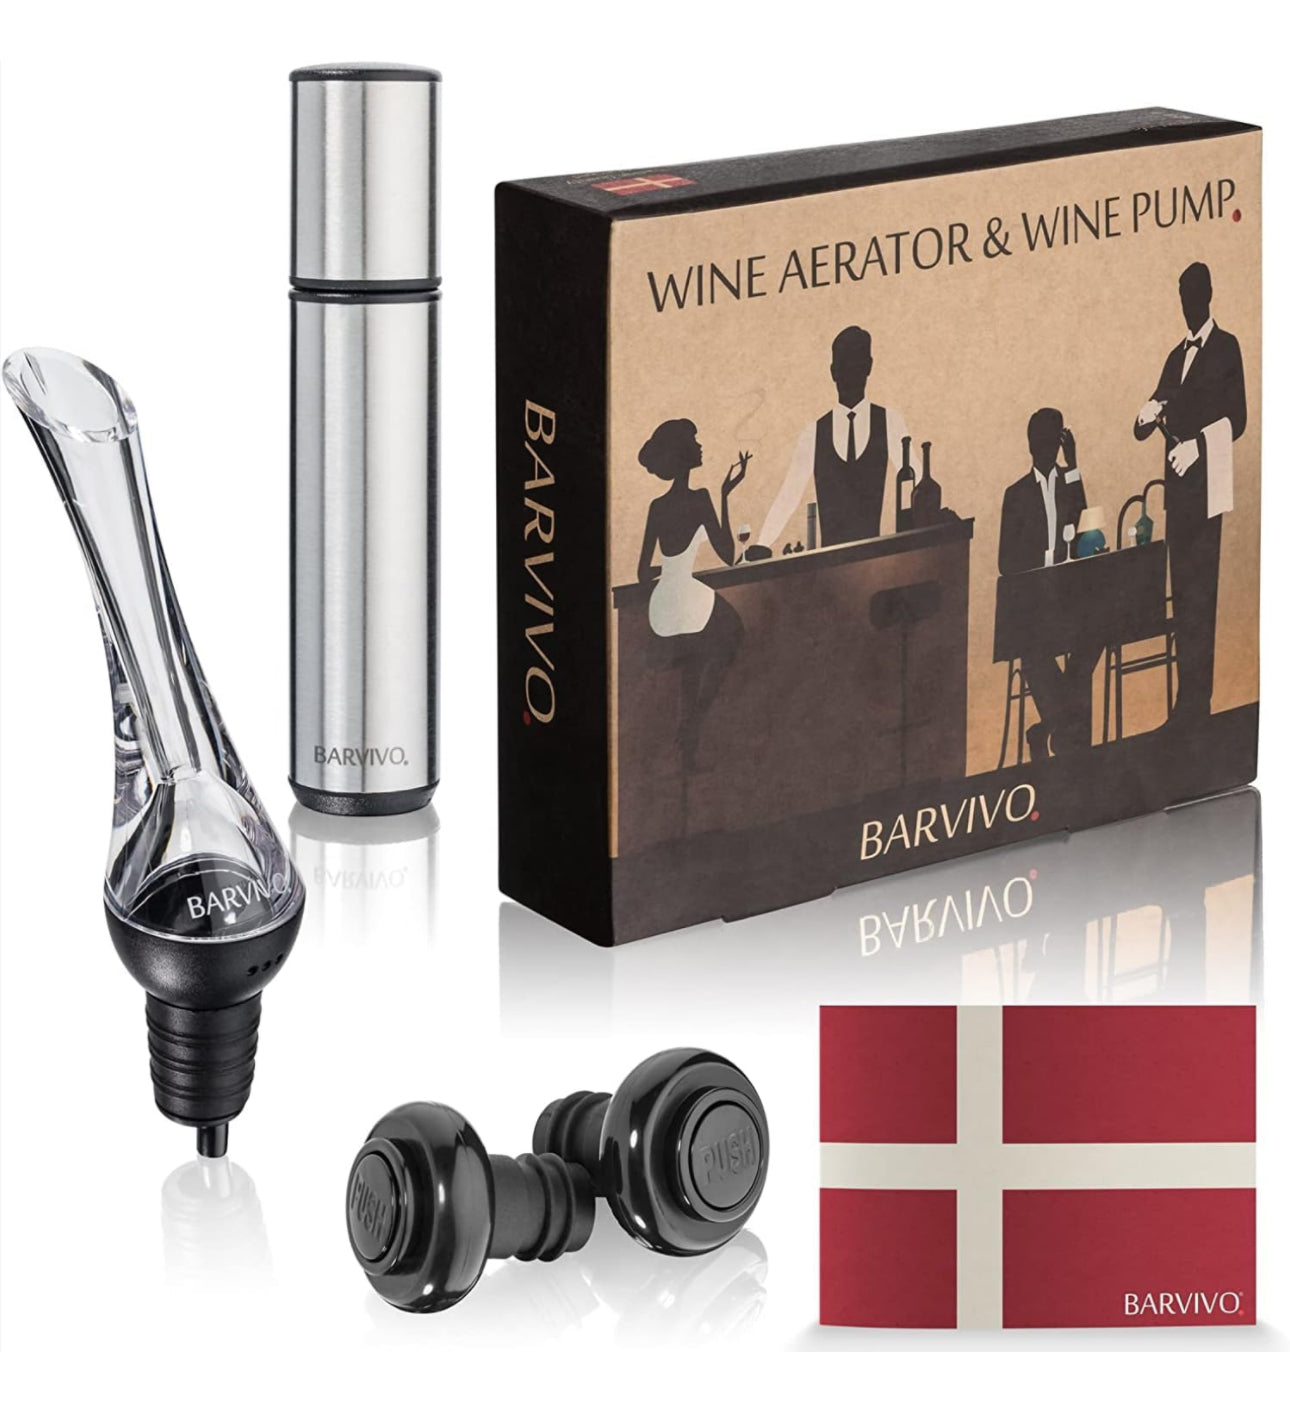 BARVIVO Premium Wine Preserver Kit - Extra Easy to Use Wine Bottle Stoppers & Vacuum Wine Pump - Keeps Red & White Wine Fresh for up to 14 Days - Ideal Gift Set for Any True Wine Lover